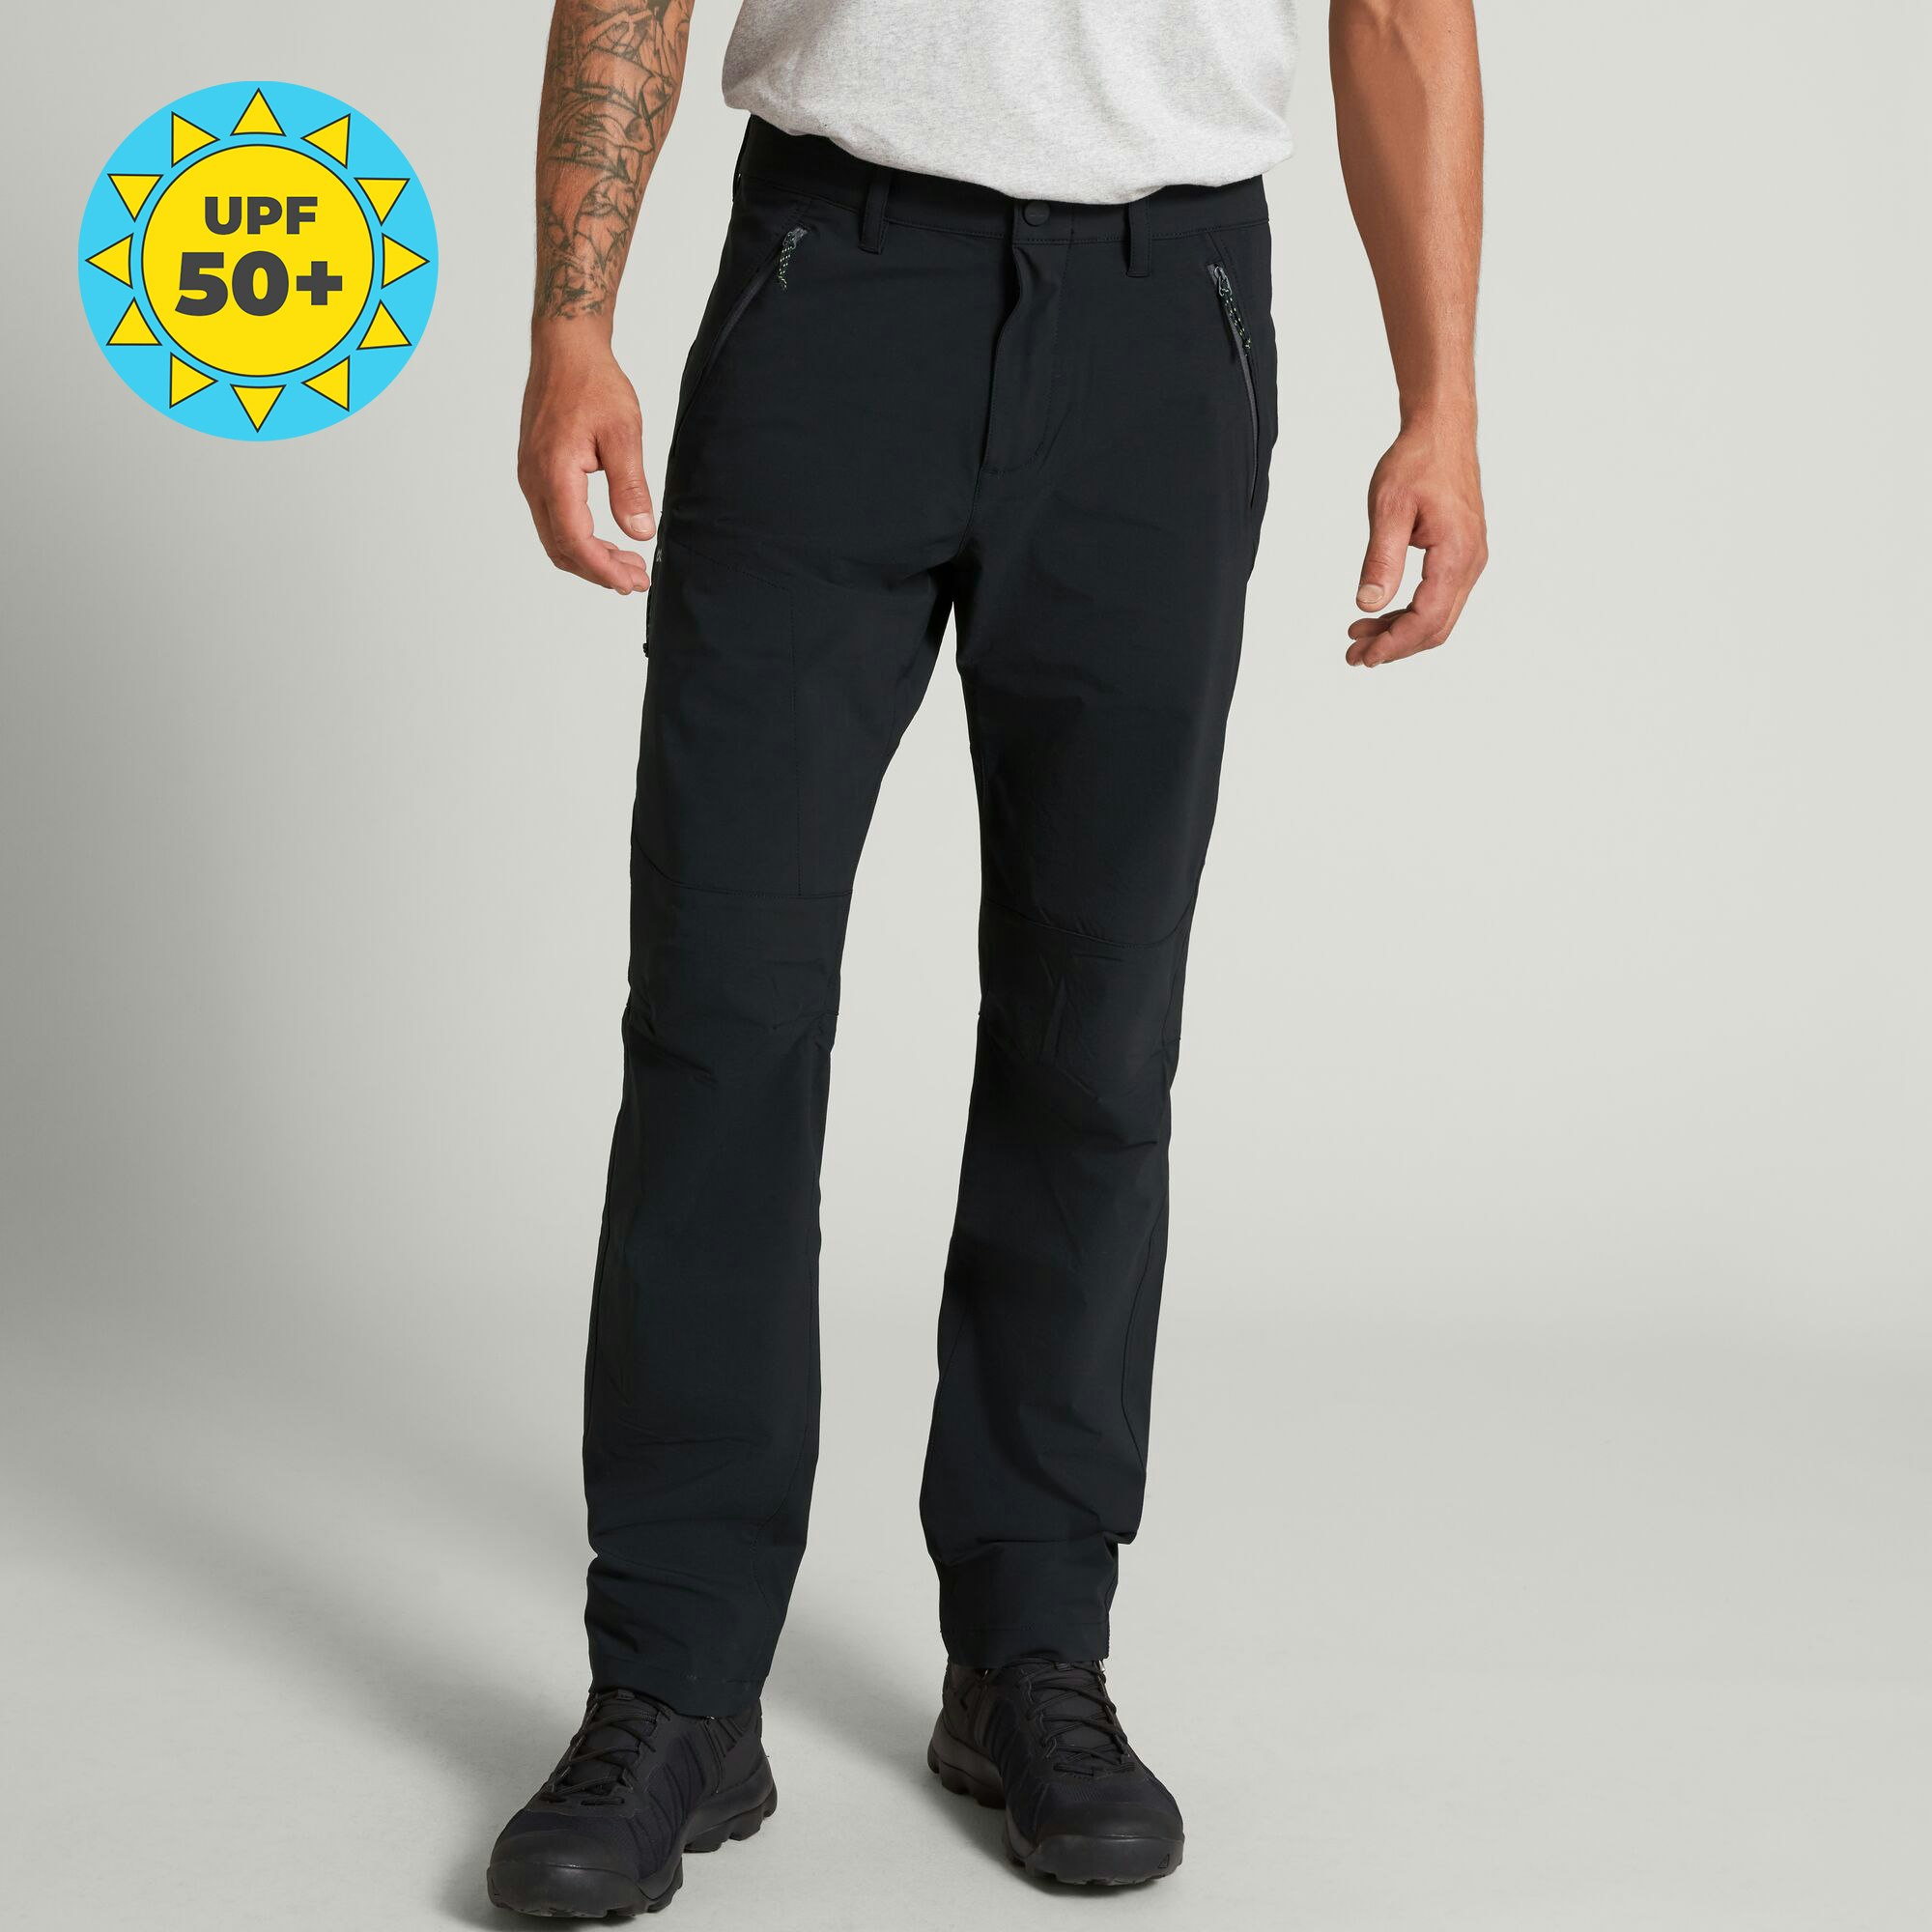 MAX Stretch Skinny Outdoor Water Resistant Pants Graphite